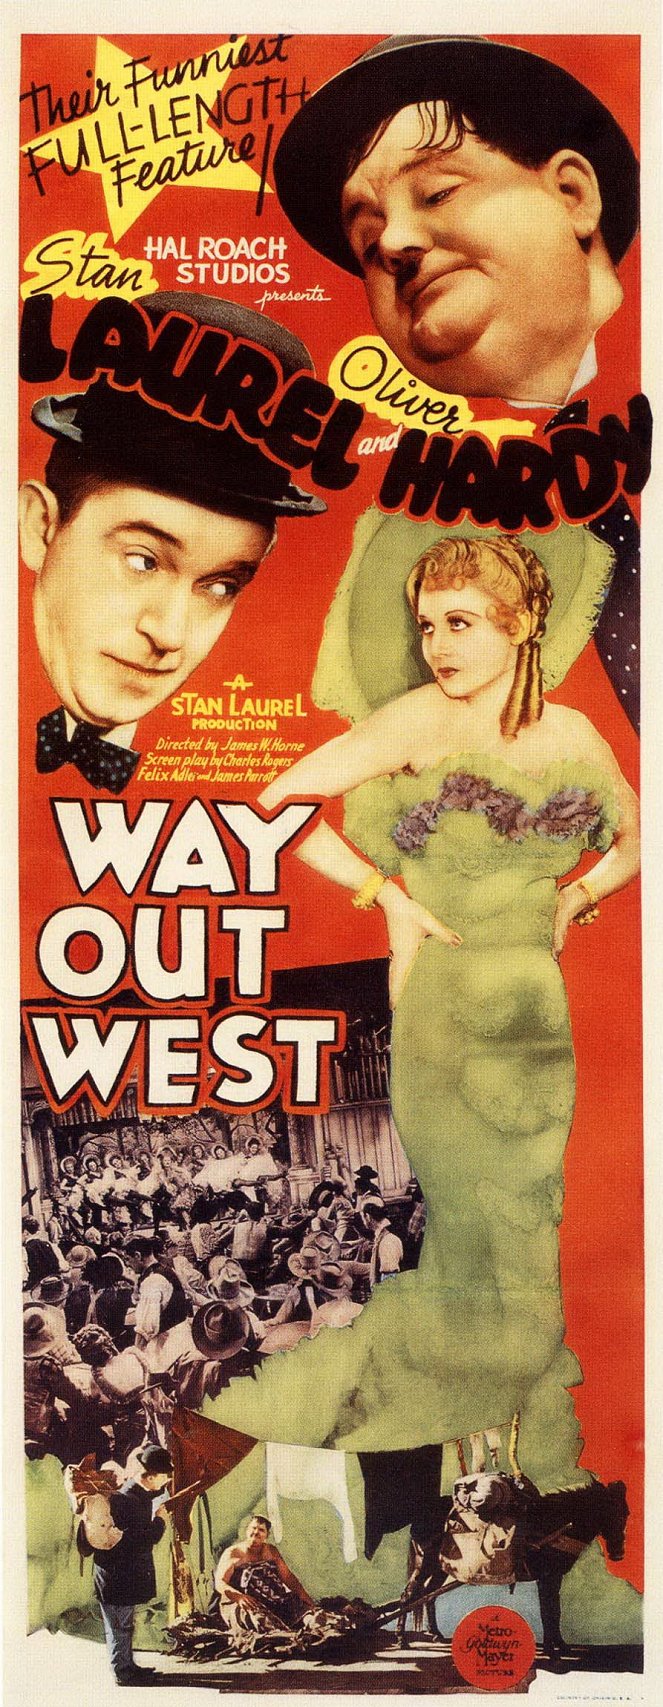 Way Out West - Posters